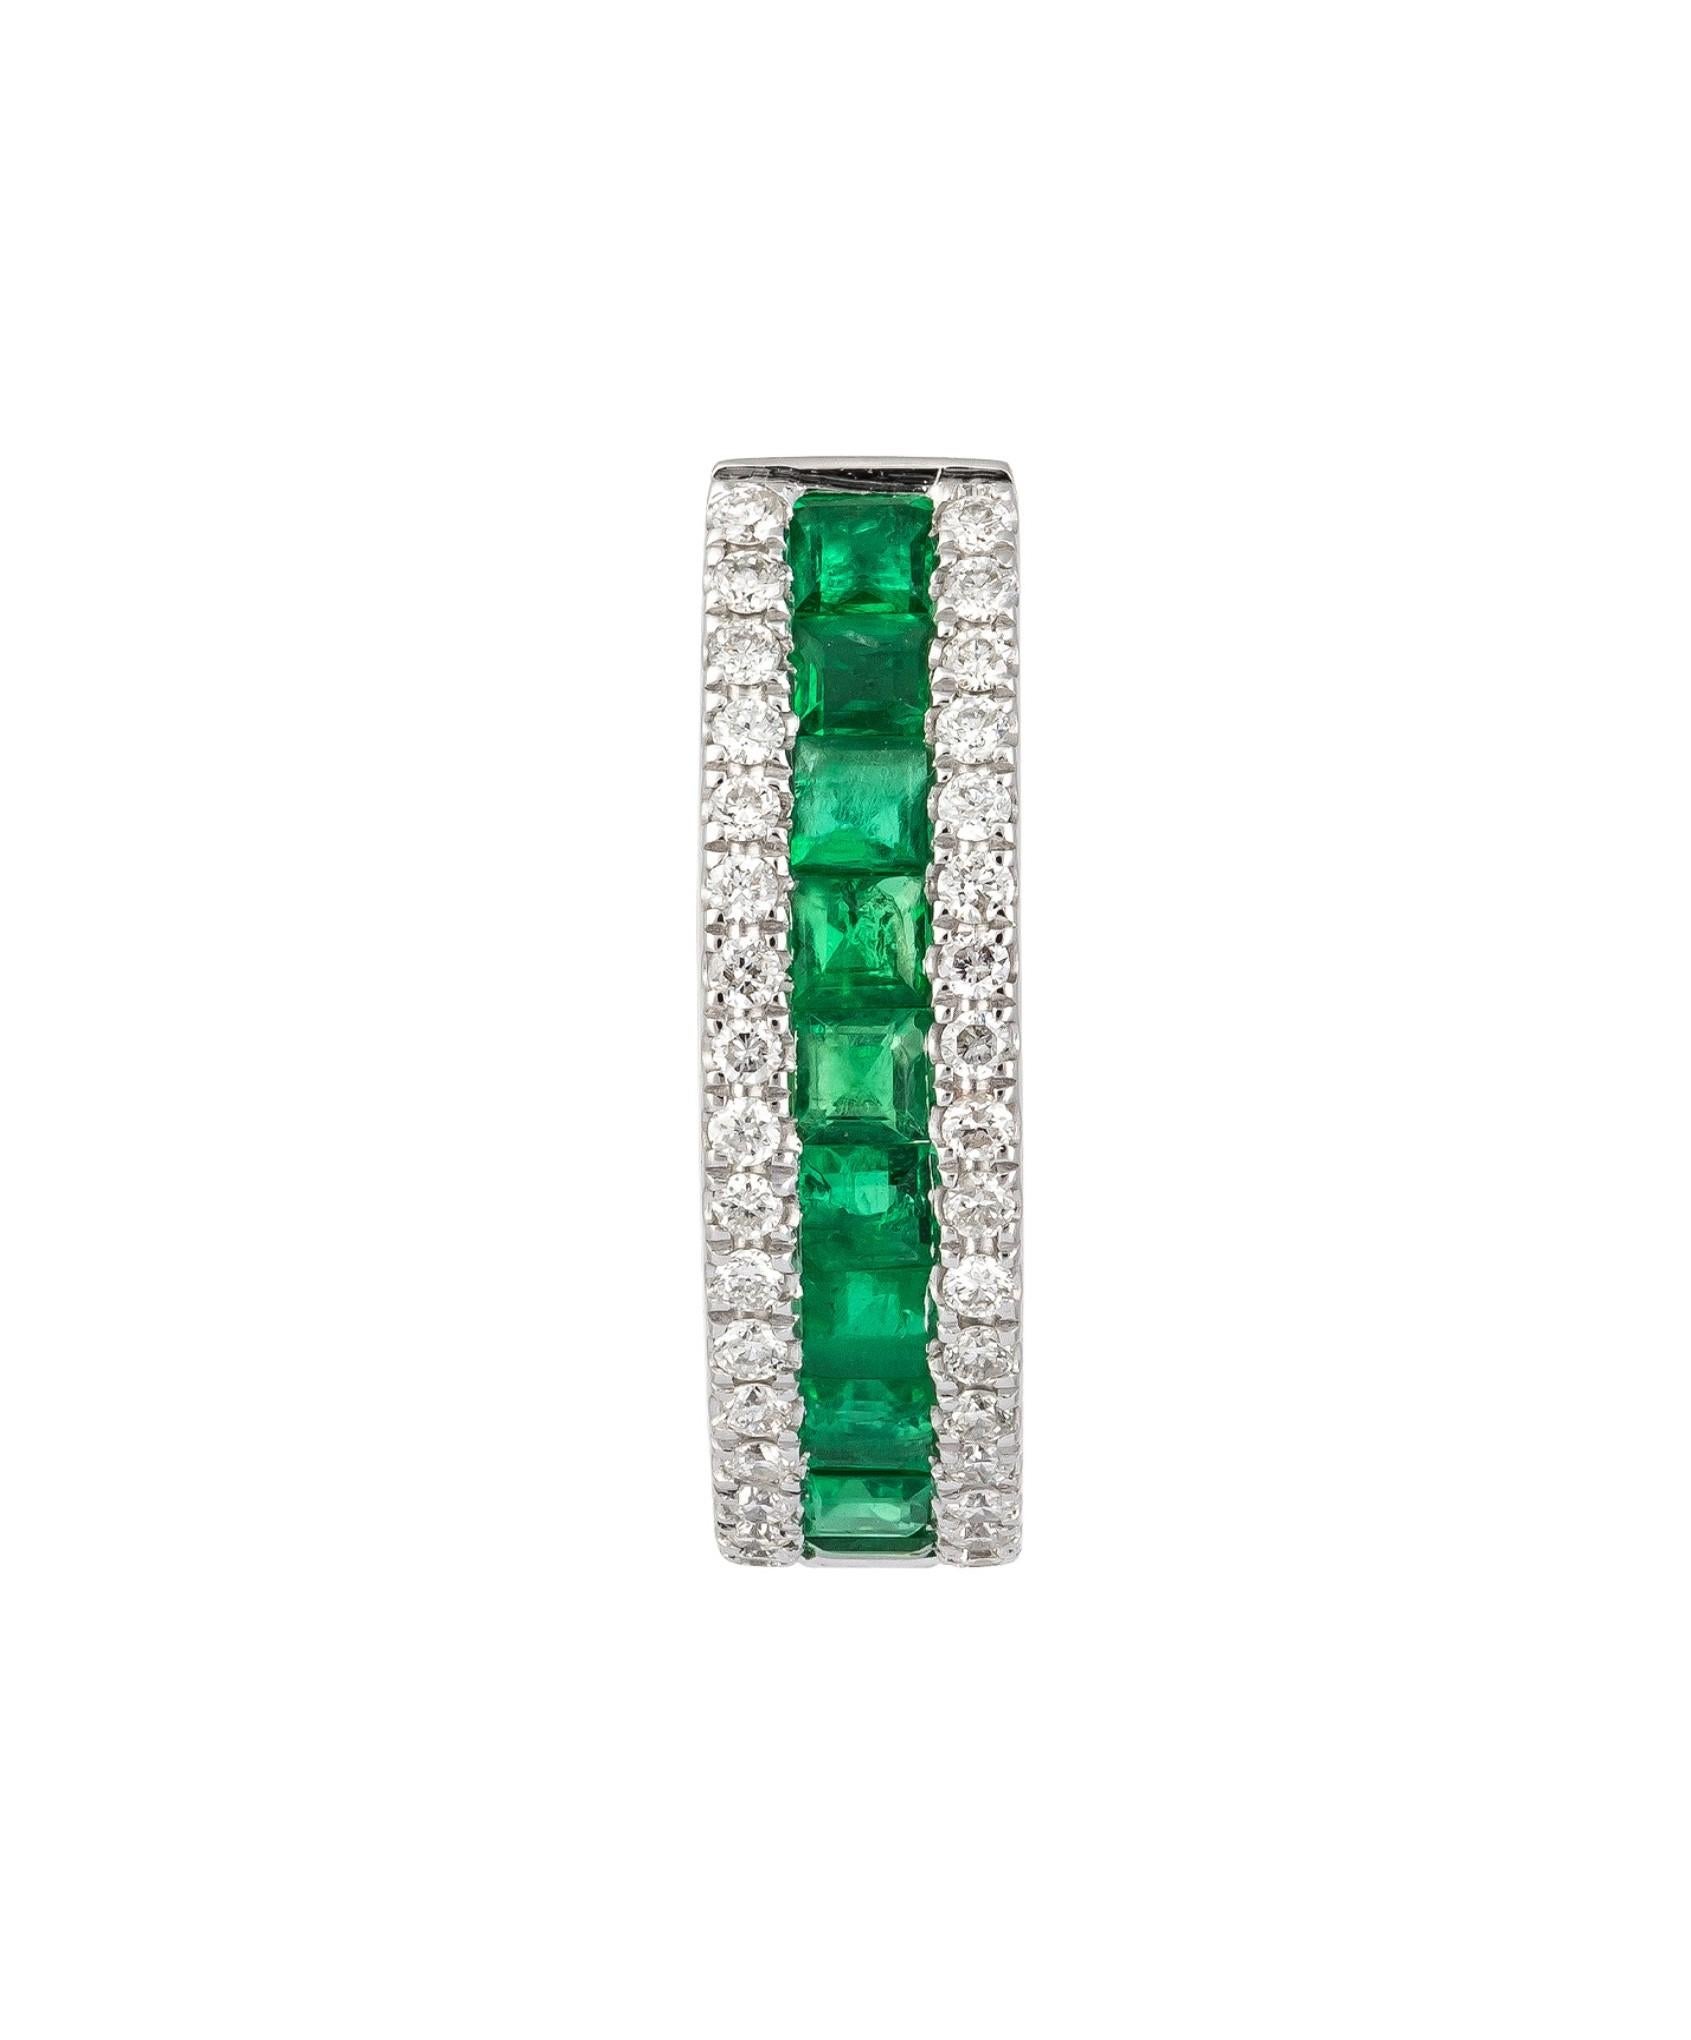 The Following Item we are offering are this Rare Important Radiant 18KT Gold Gorgeous Glittering and Sparkling Magnificent Fancy Emerald and Diamond Hoop Earrings. Earrings contain approx 1.40CTS of Beautiful Rare Fancy Emeralds and Diamonds!!!